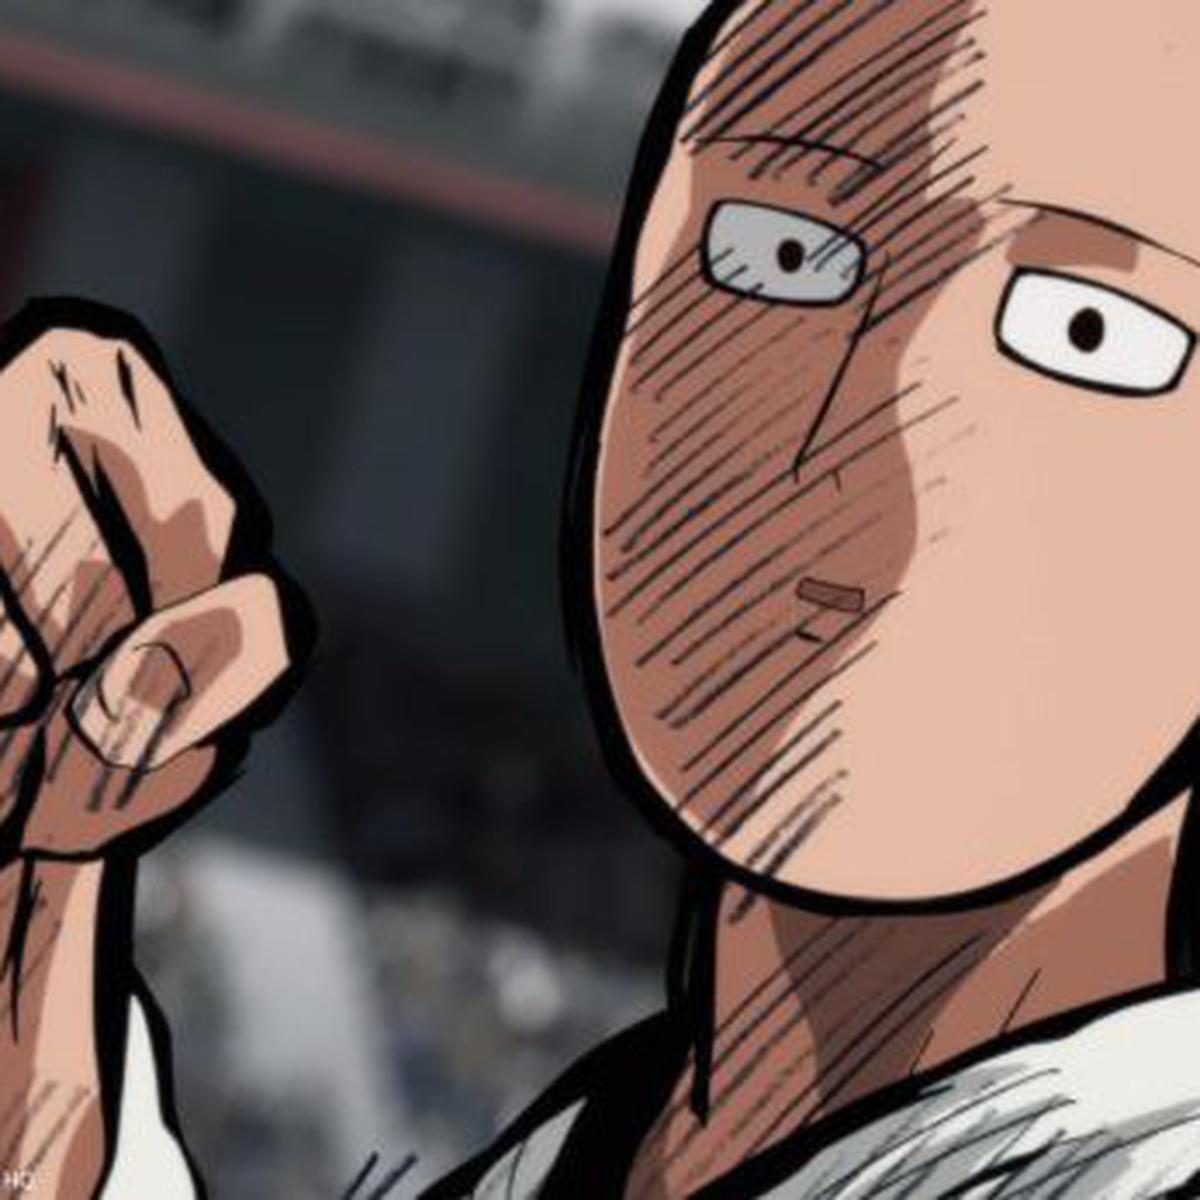 REACCION: ONE PUNCH MAN, TEMP 2, CAPITULO 2